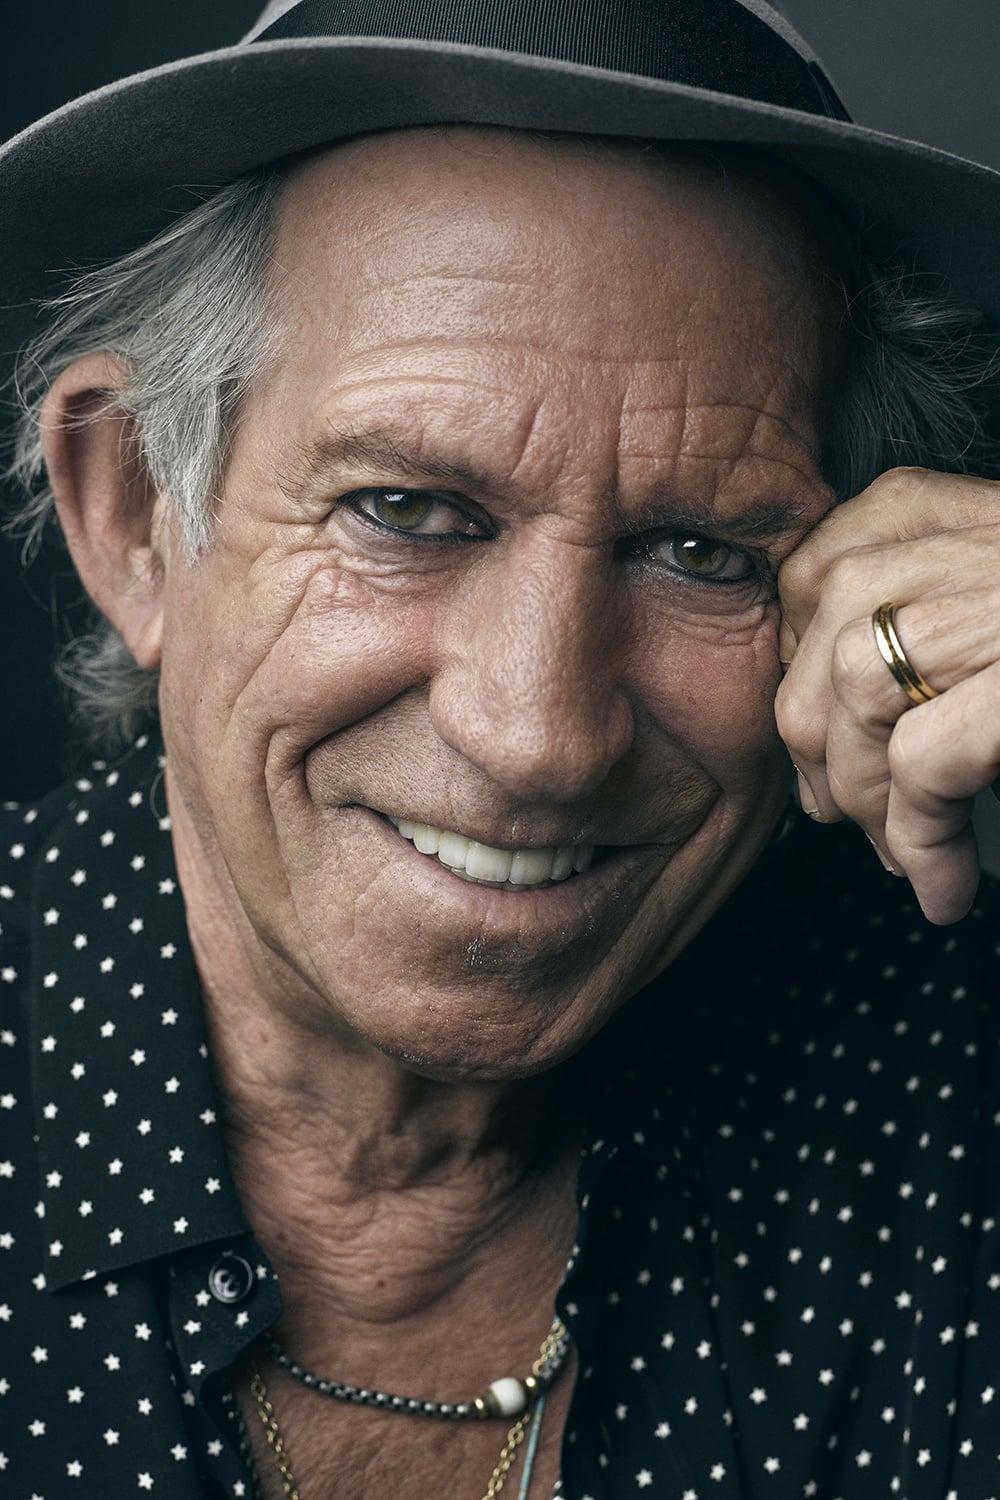 Keith Richards | Self - The Rolling Stones Member